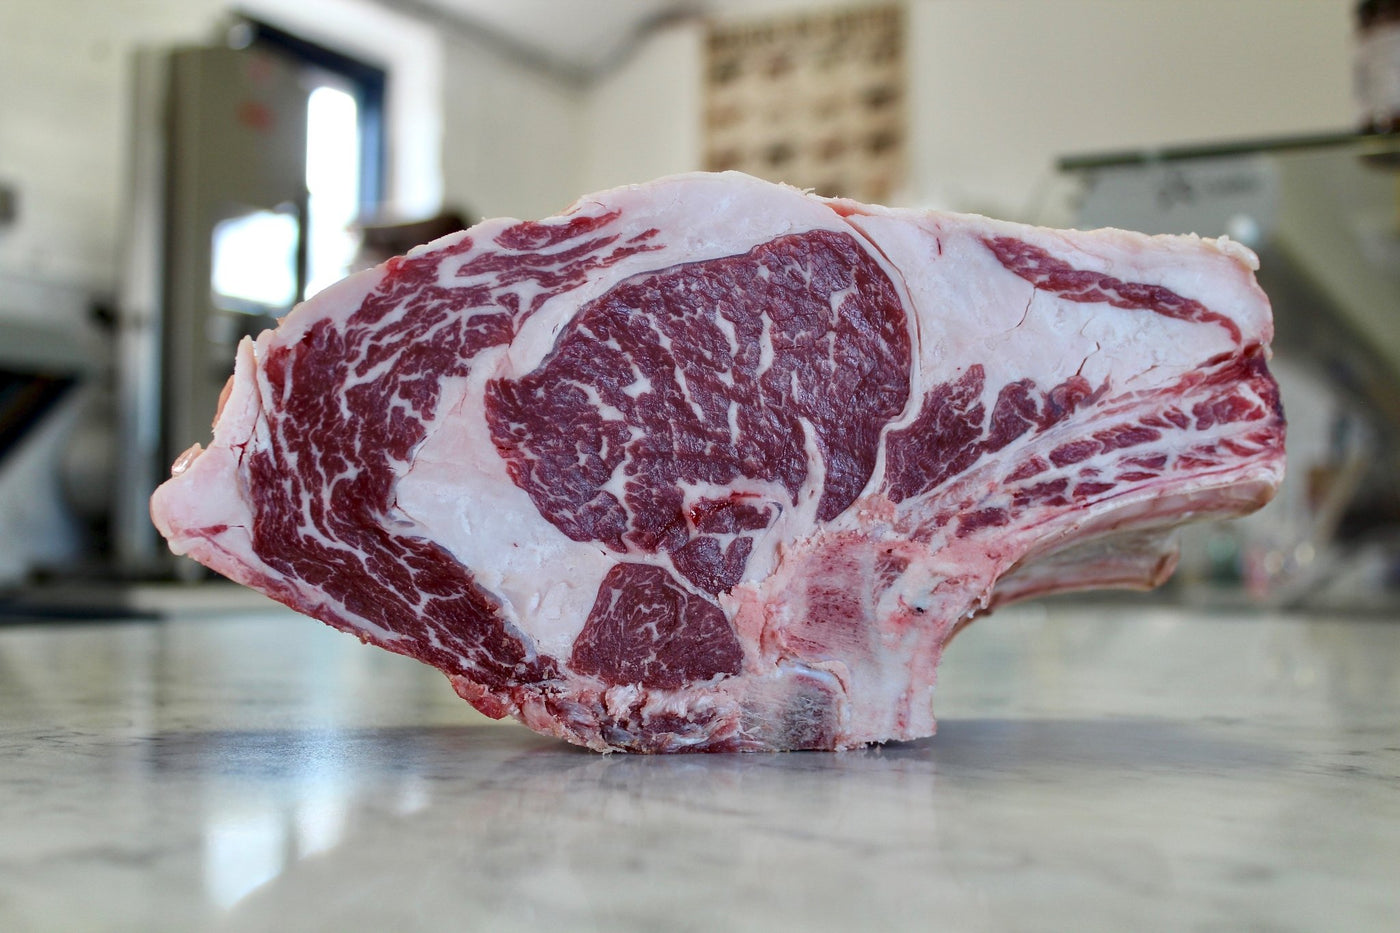 Dry-Aged Spanish Angus Prime Cut - Thomas Joseph Butchery - Ethical Dry-Aged Meat The Best Steak UK Thomas Joseph Butchery